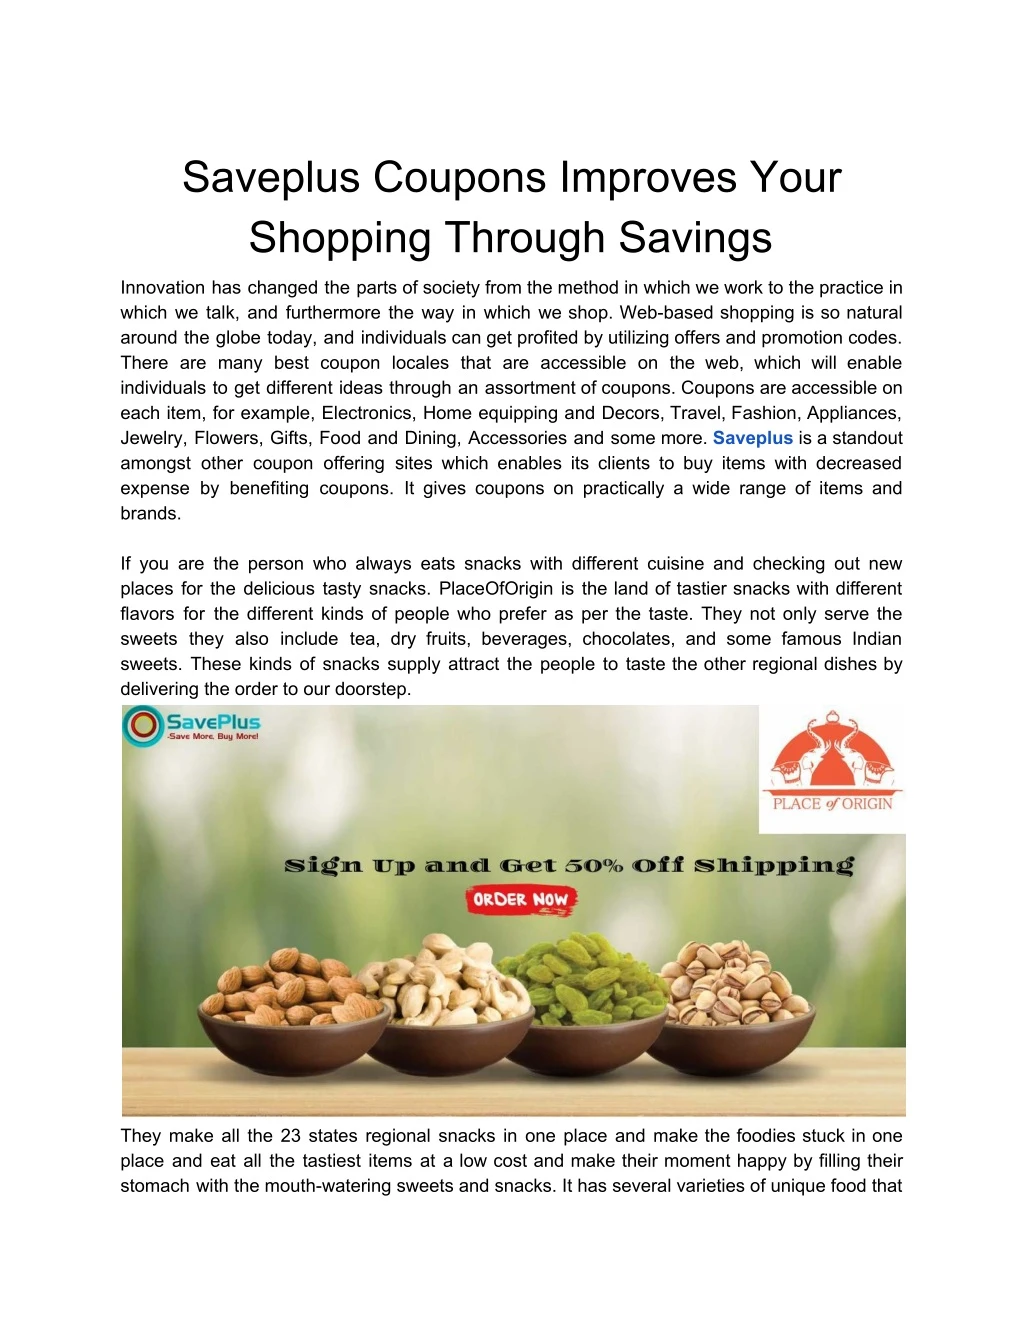 saveplus coupons improves your shopping through